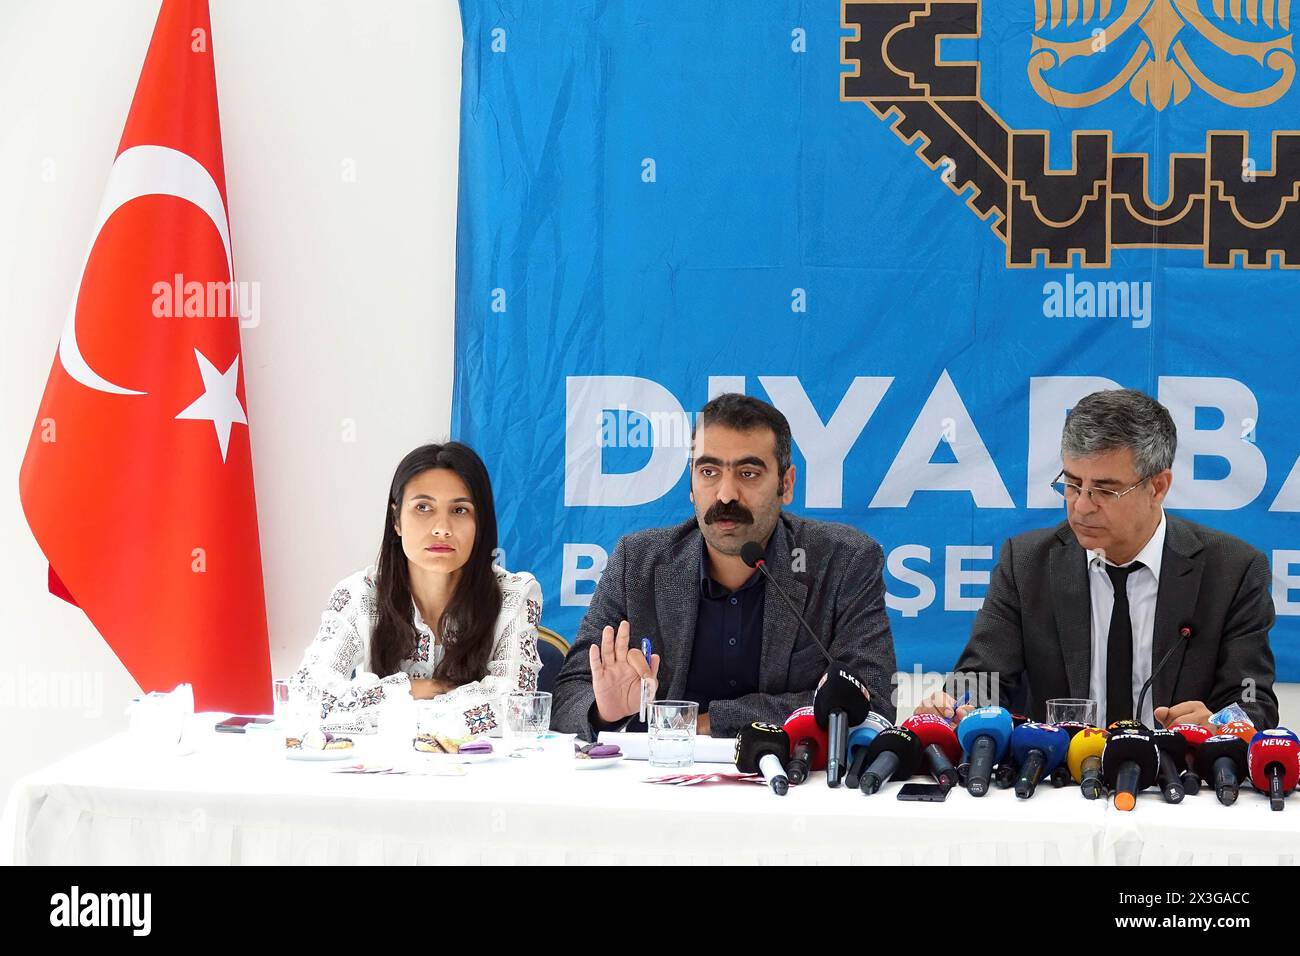 Diyarbakir Metropolitan Municipality Co-Mayor Dogan Hatun is seen making a statement about the large debts left to them by the Trustee appointed by the AK Party government. In Turkey, investigations initiated by the Ministry of Internal Affairs and Prosecutors' Offices regarding the allegations that the Turkish flag was raised in the municipal buildings and the Turkish national anthem was not sung about the Diyarbakir and Mardin Metropolitan Municipalities, which were won by the Kurdish opposition, and the Municipality of Diyarbak?r's Sur district, continue. The allegations and some images wer Stock Photo